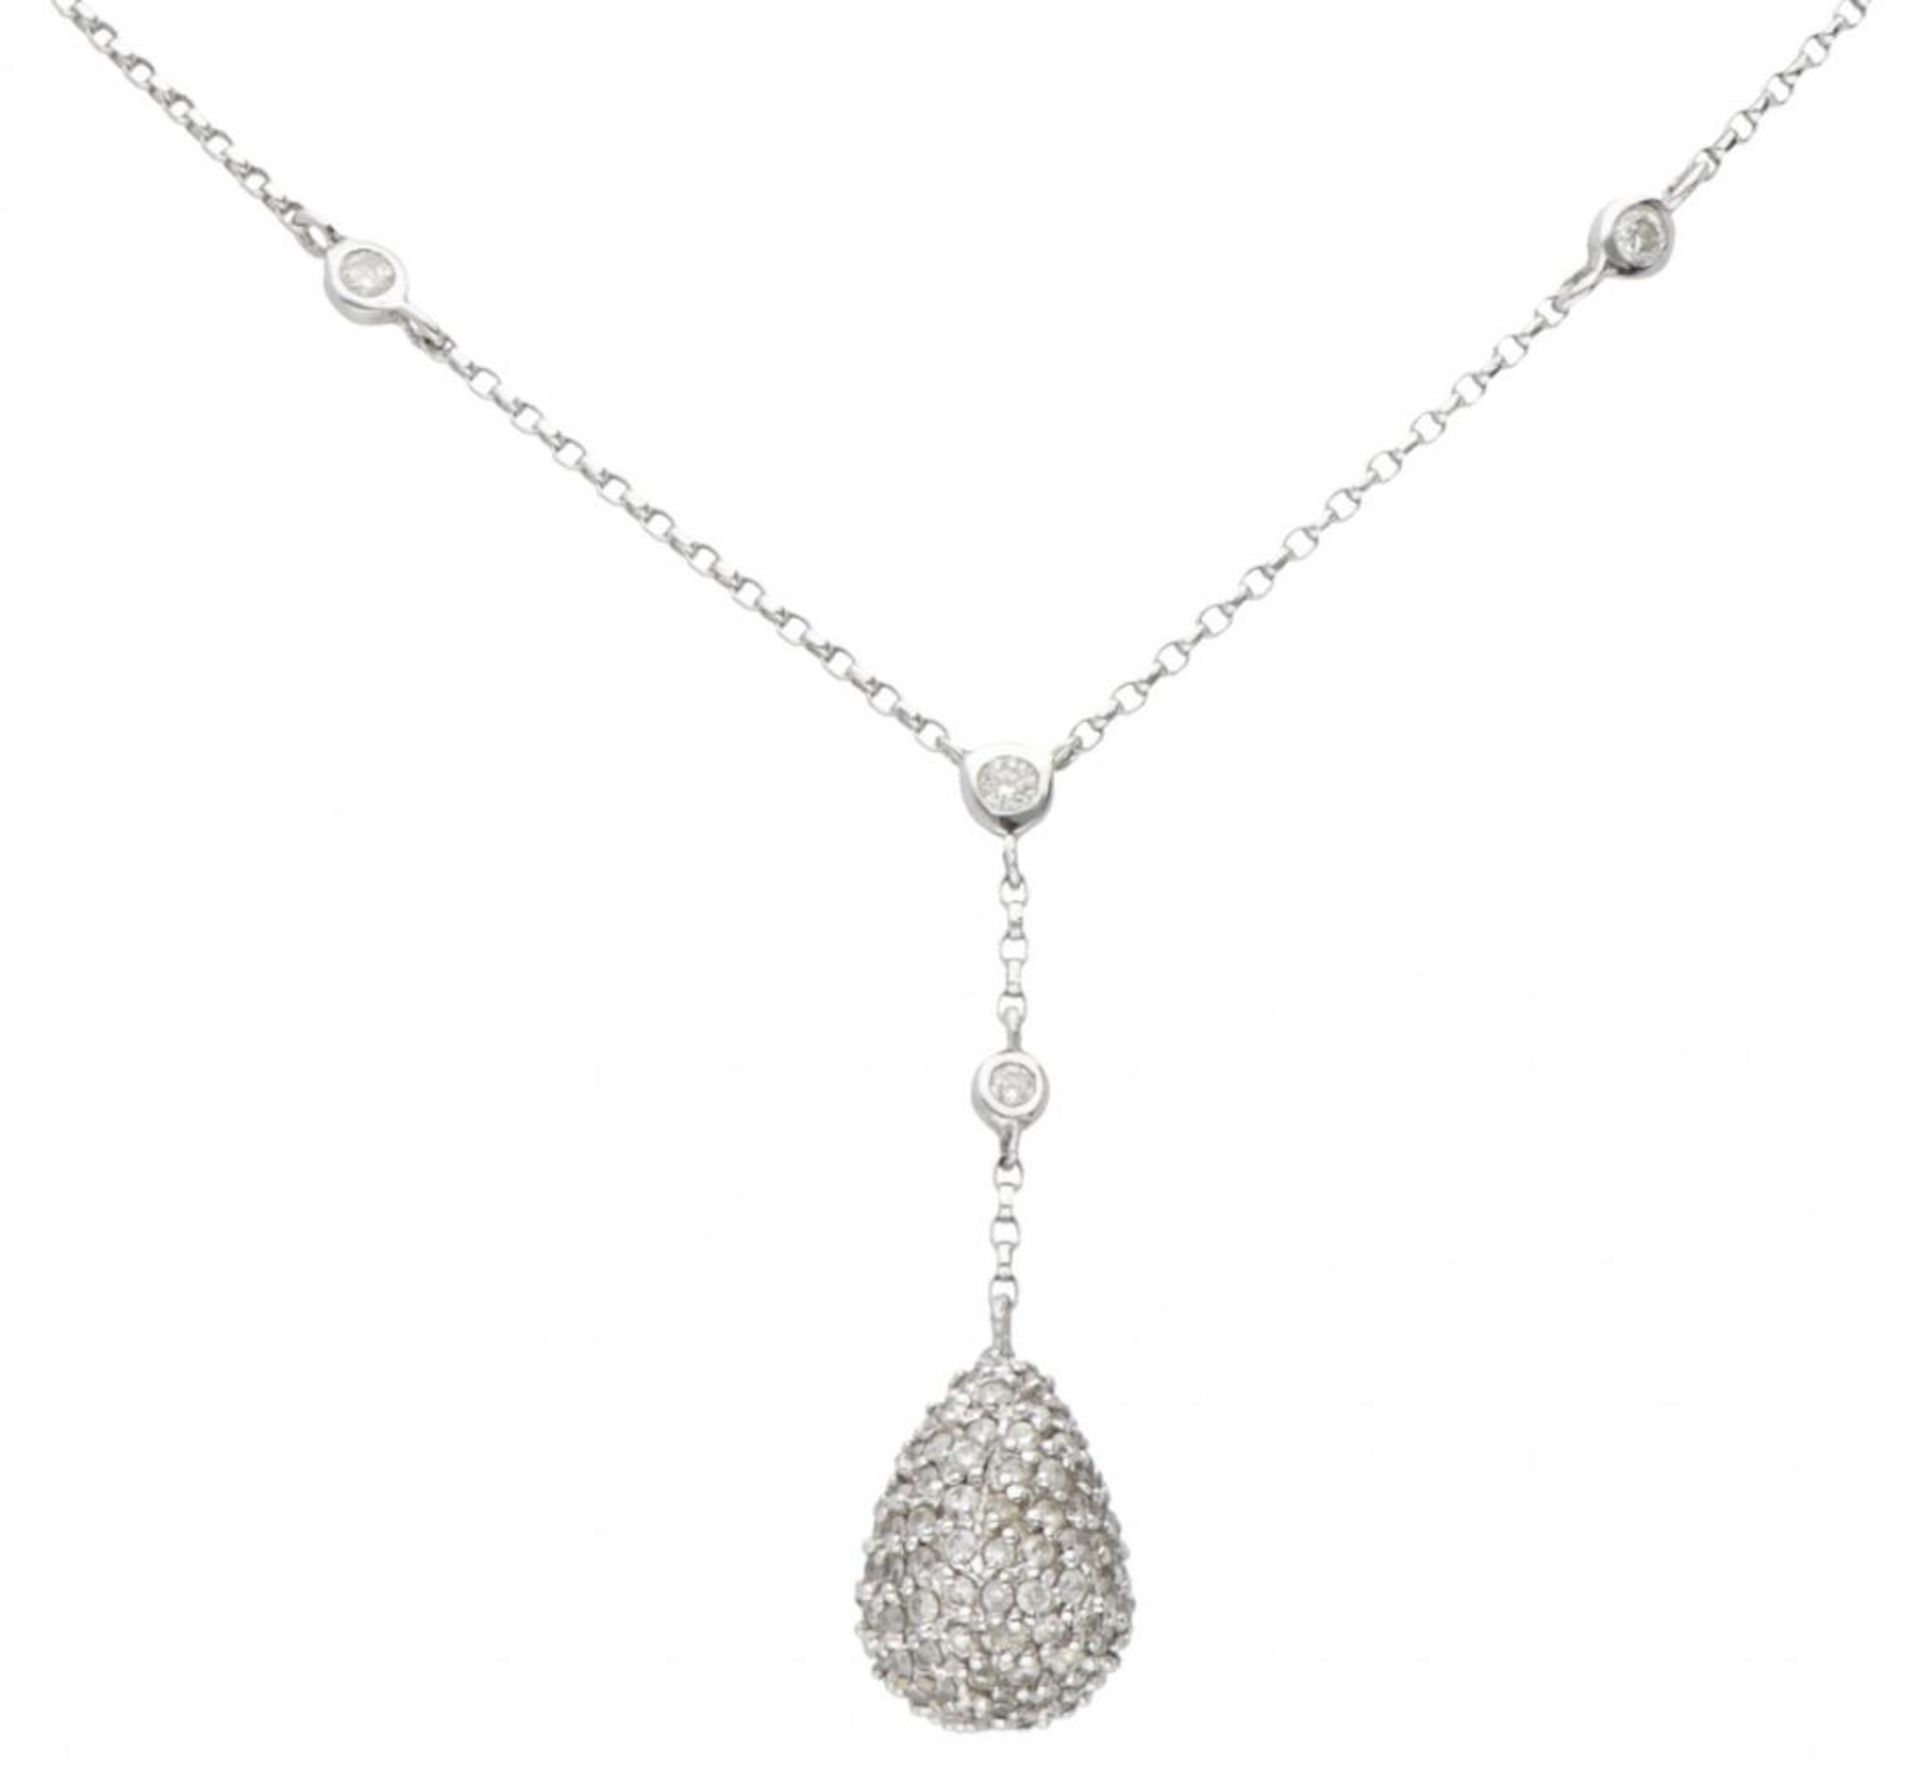 18K. White gold necklace with a teardrop-shaped pendant and set with approx. 0.83 ct. diamond.